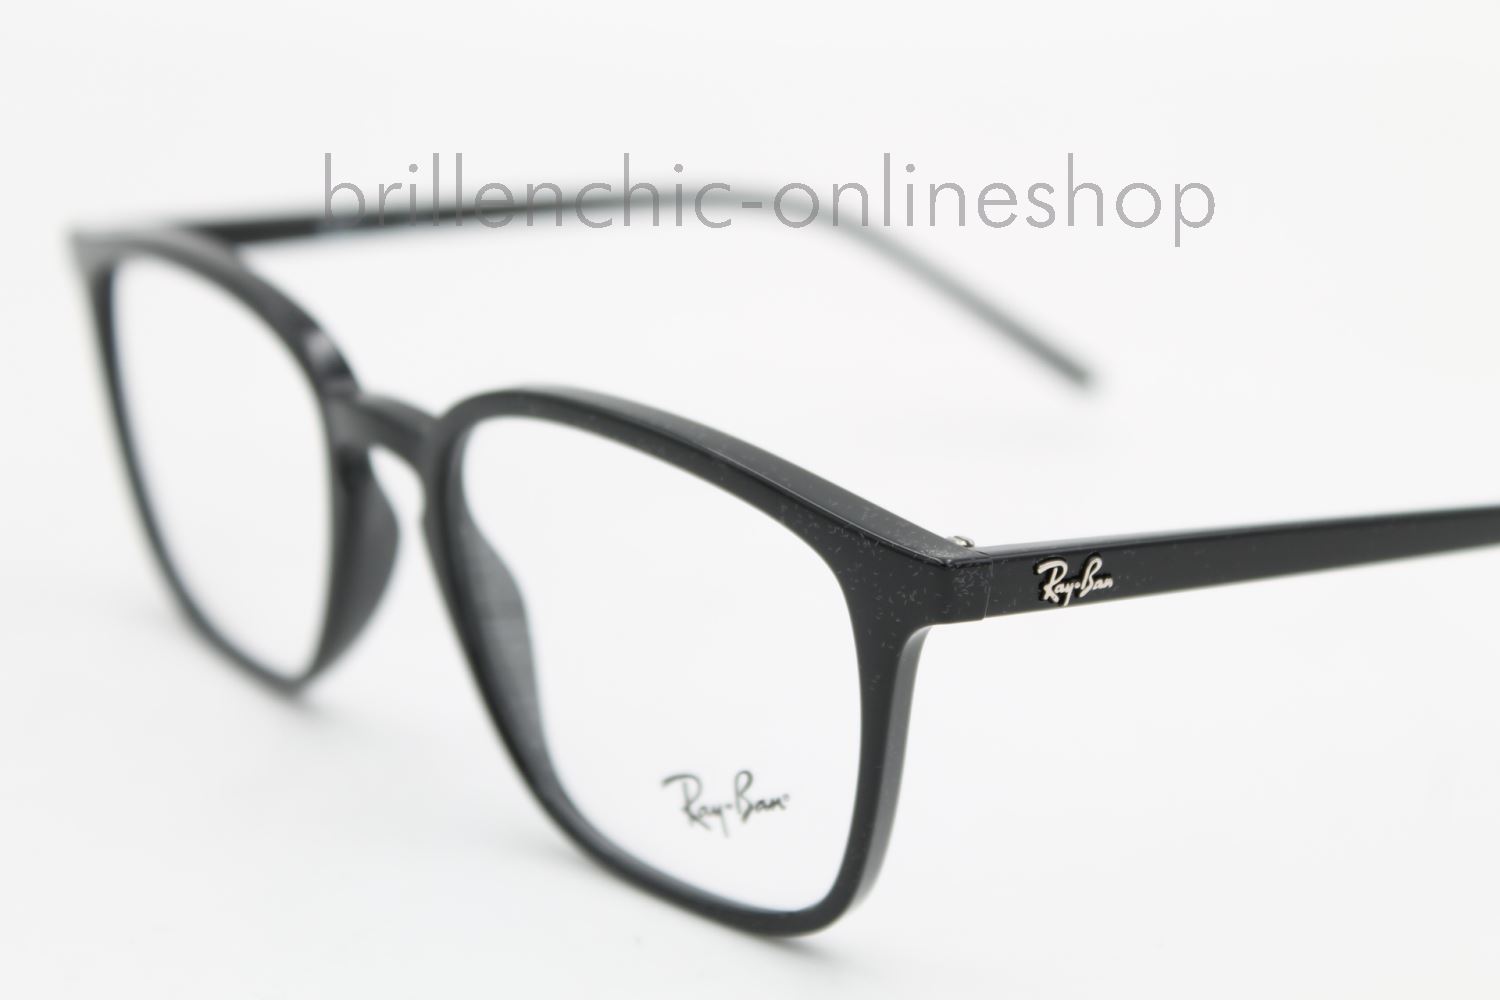 Brillenchic-onlineshop in Berlin - Ray Ban RB 7185 2000 